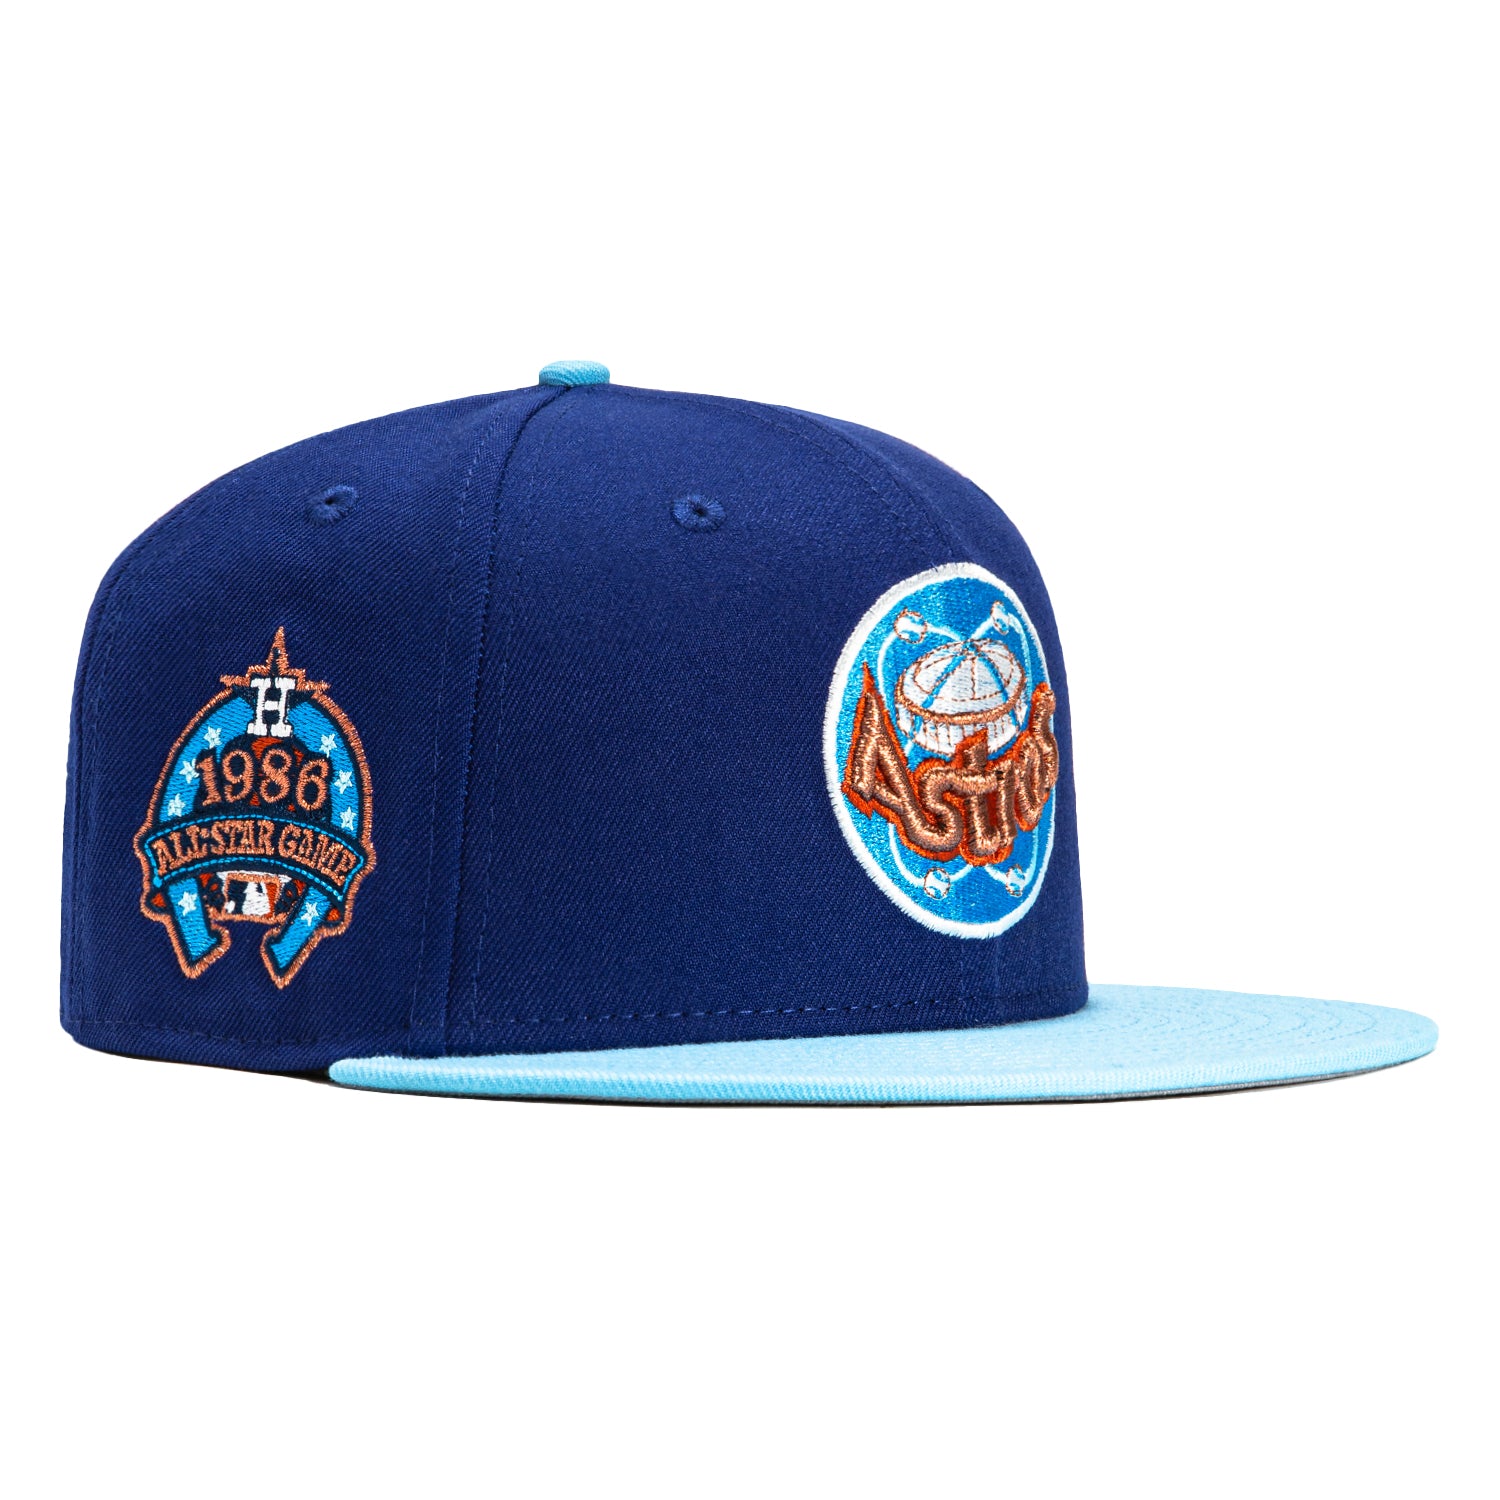 New Era 59FIFTY Houston Astros 1986 All Star Game Patch Hat - Royal, Light Blue Royal/Light Blue / 7 1/2